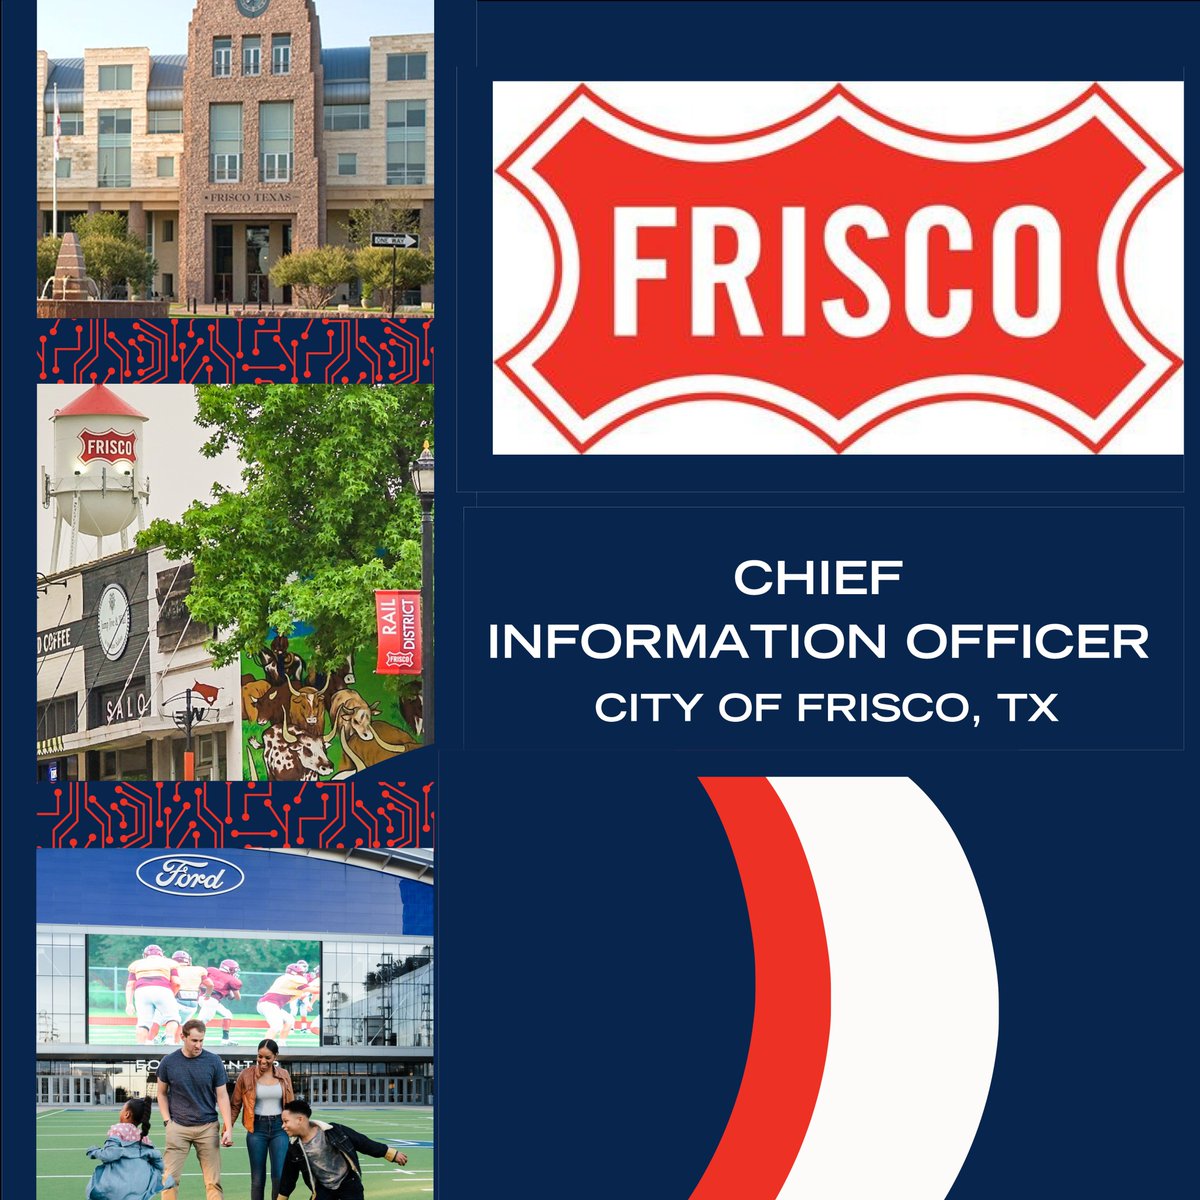 The City of Frisco, TX is looking for a Chief Information Officer! Interested applicants need to send their resume/cover letter to  resumes@affionpublic.com by May 1st

#cio #chiefinformationofficer #friscotx #frisco #jobopening #jobopportunity #texas #tx #affionpublic